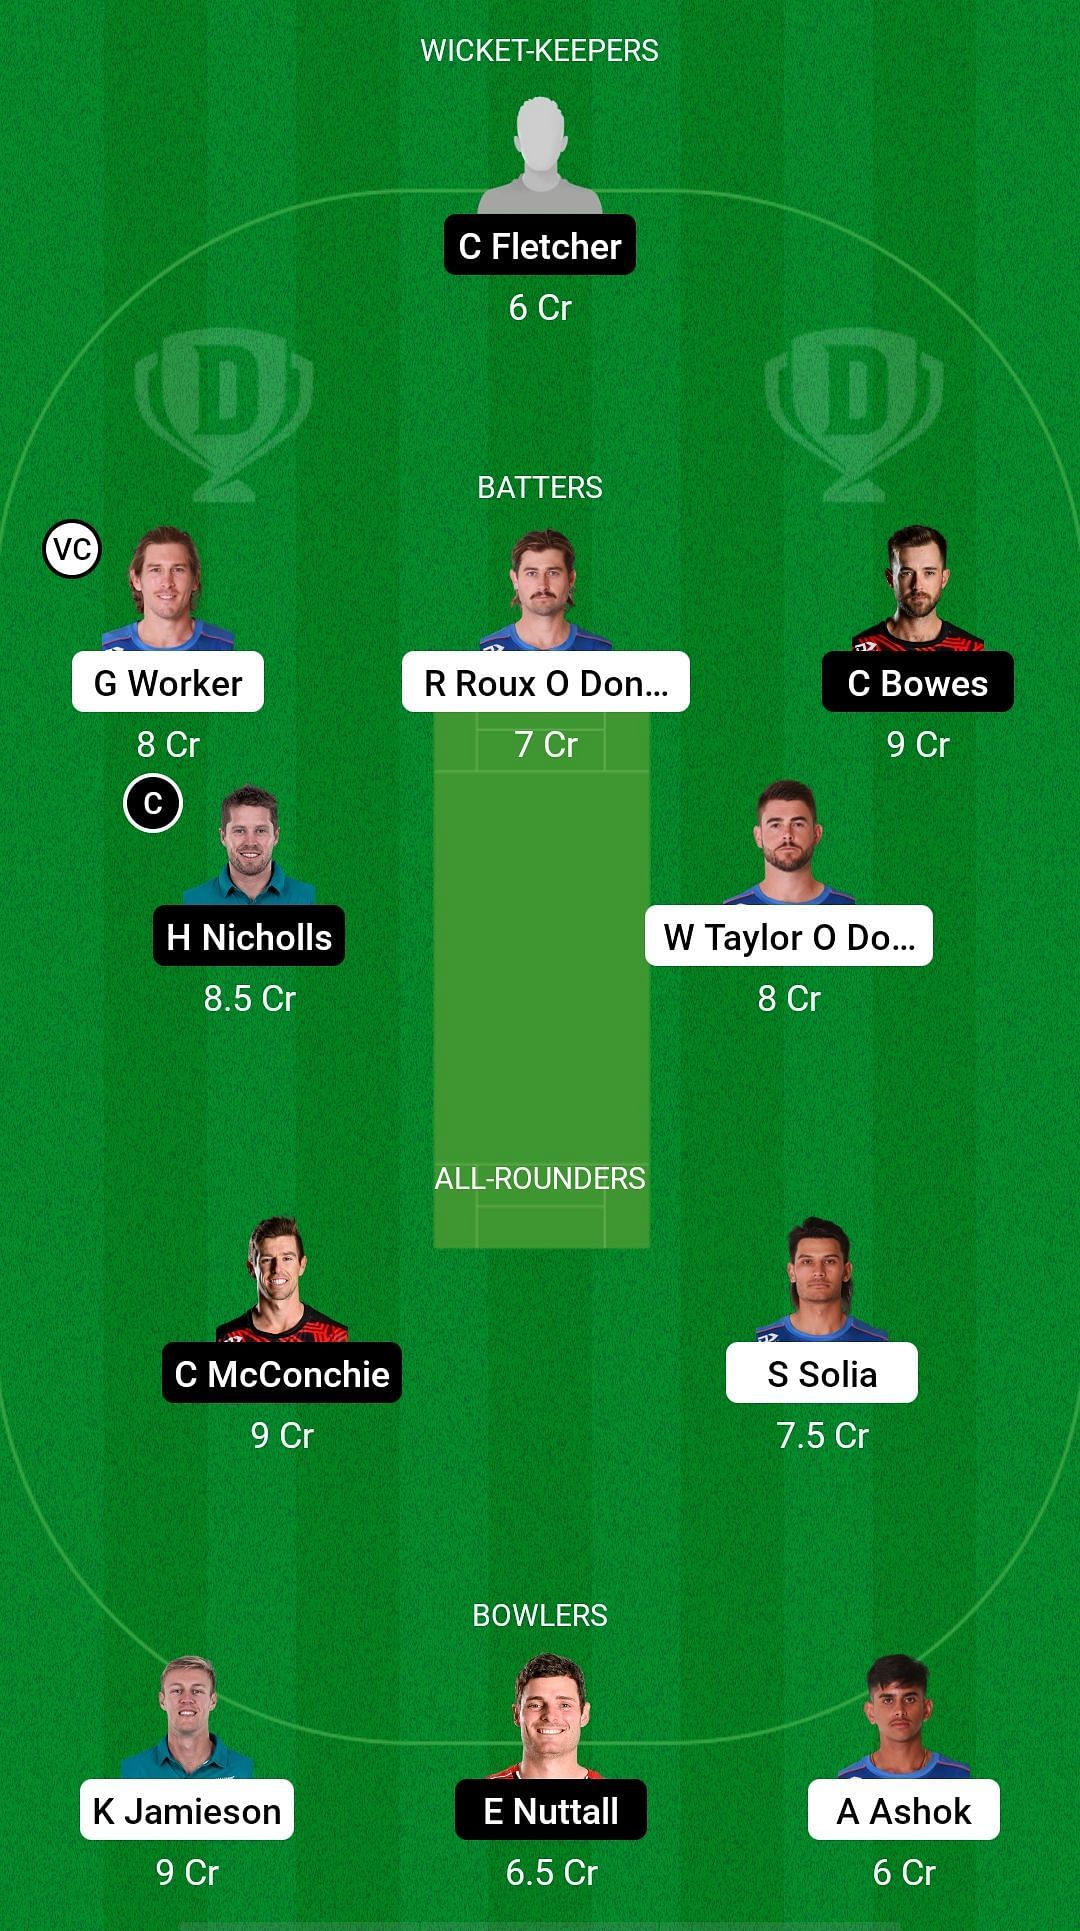 Auckland Aces vs Canterbury Kings Dream11 Prediction - The Ford Trophy: Fantasy Suggestion #1